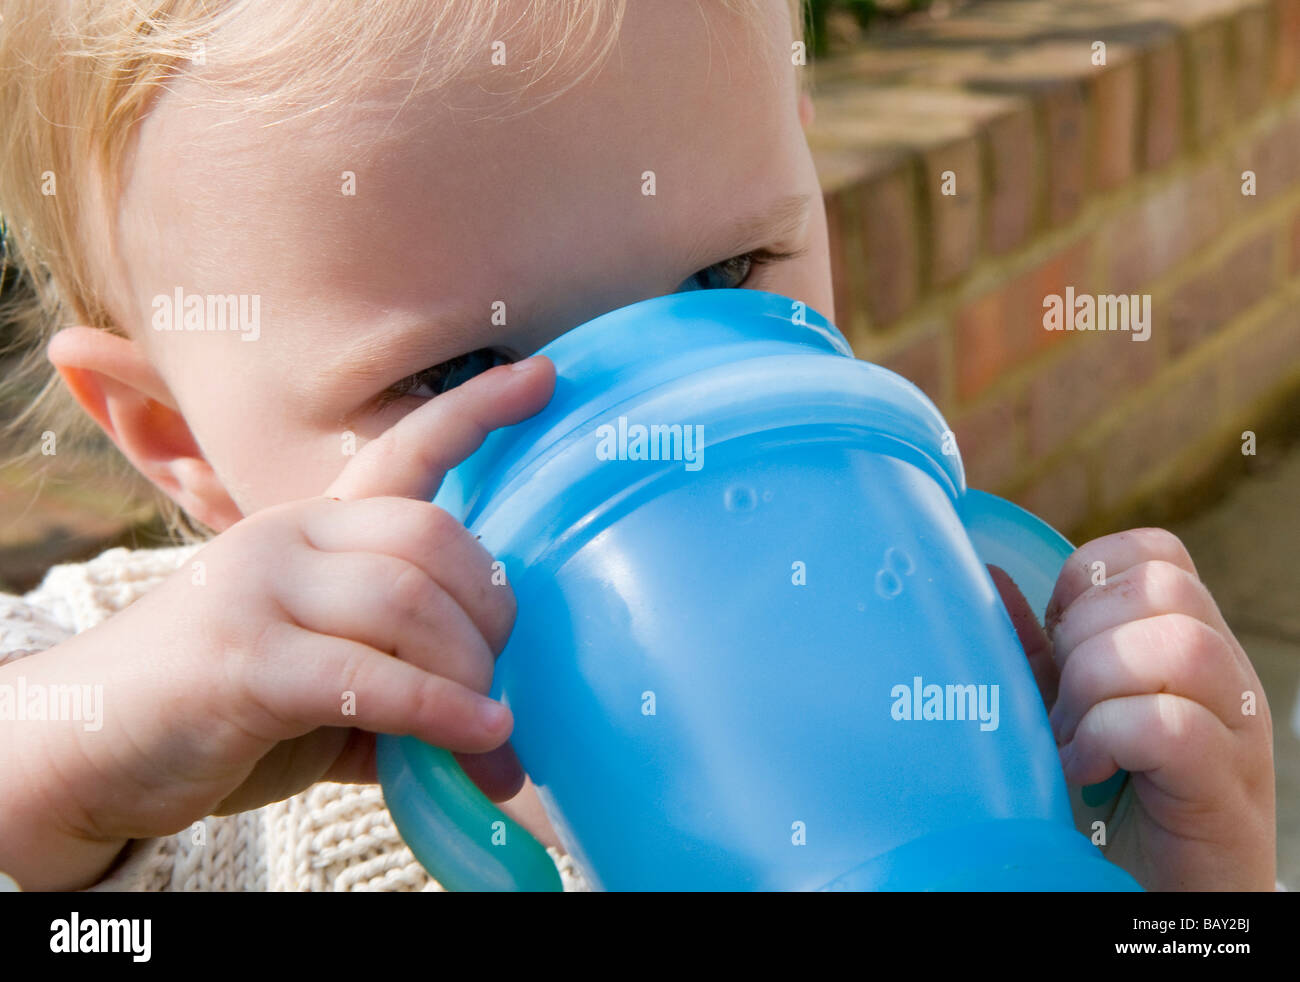 https://c8.alamy.com/comp/BAY2BJ/baby-girl-drinking-water-from-a-non-spill-cup-BAY2BJ.jpg